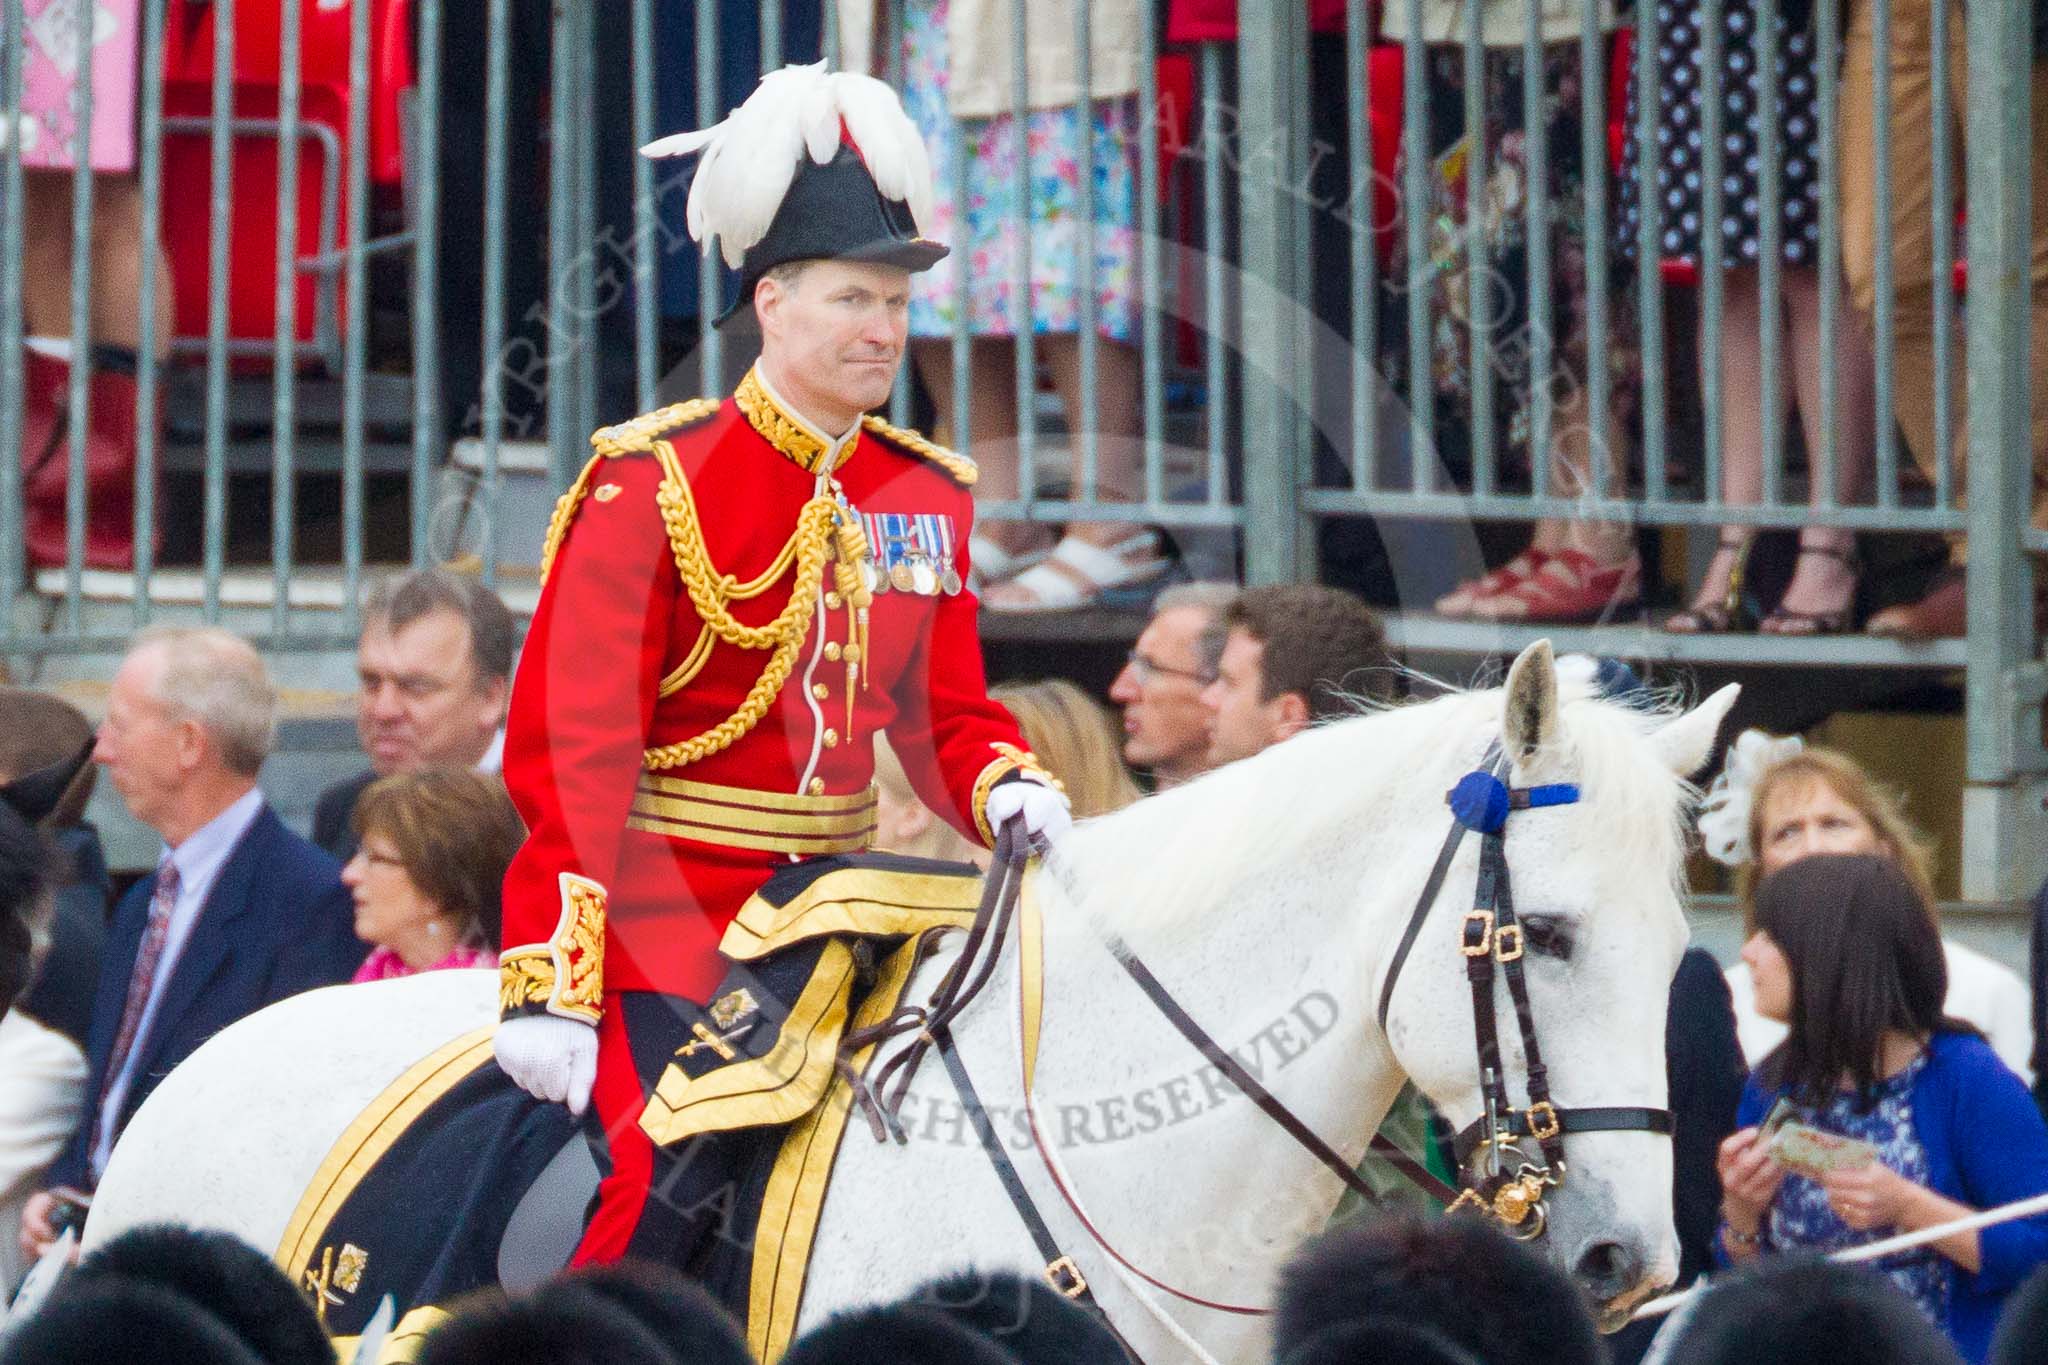 Trooping the Colour 2015. Image #246, 13 June 2015 10:59 Horse Guards Parade, London, UK